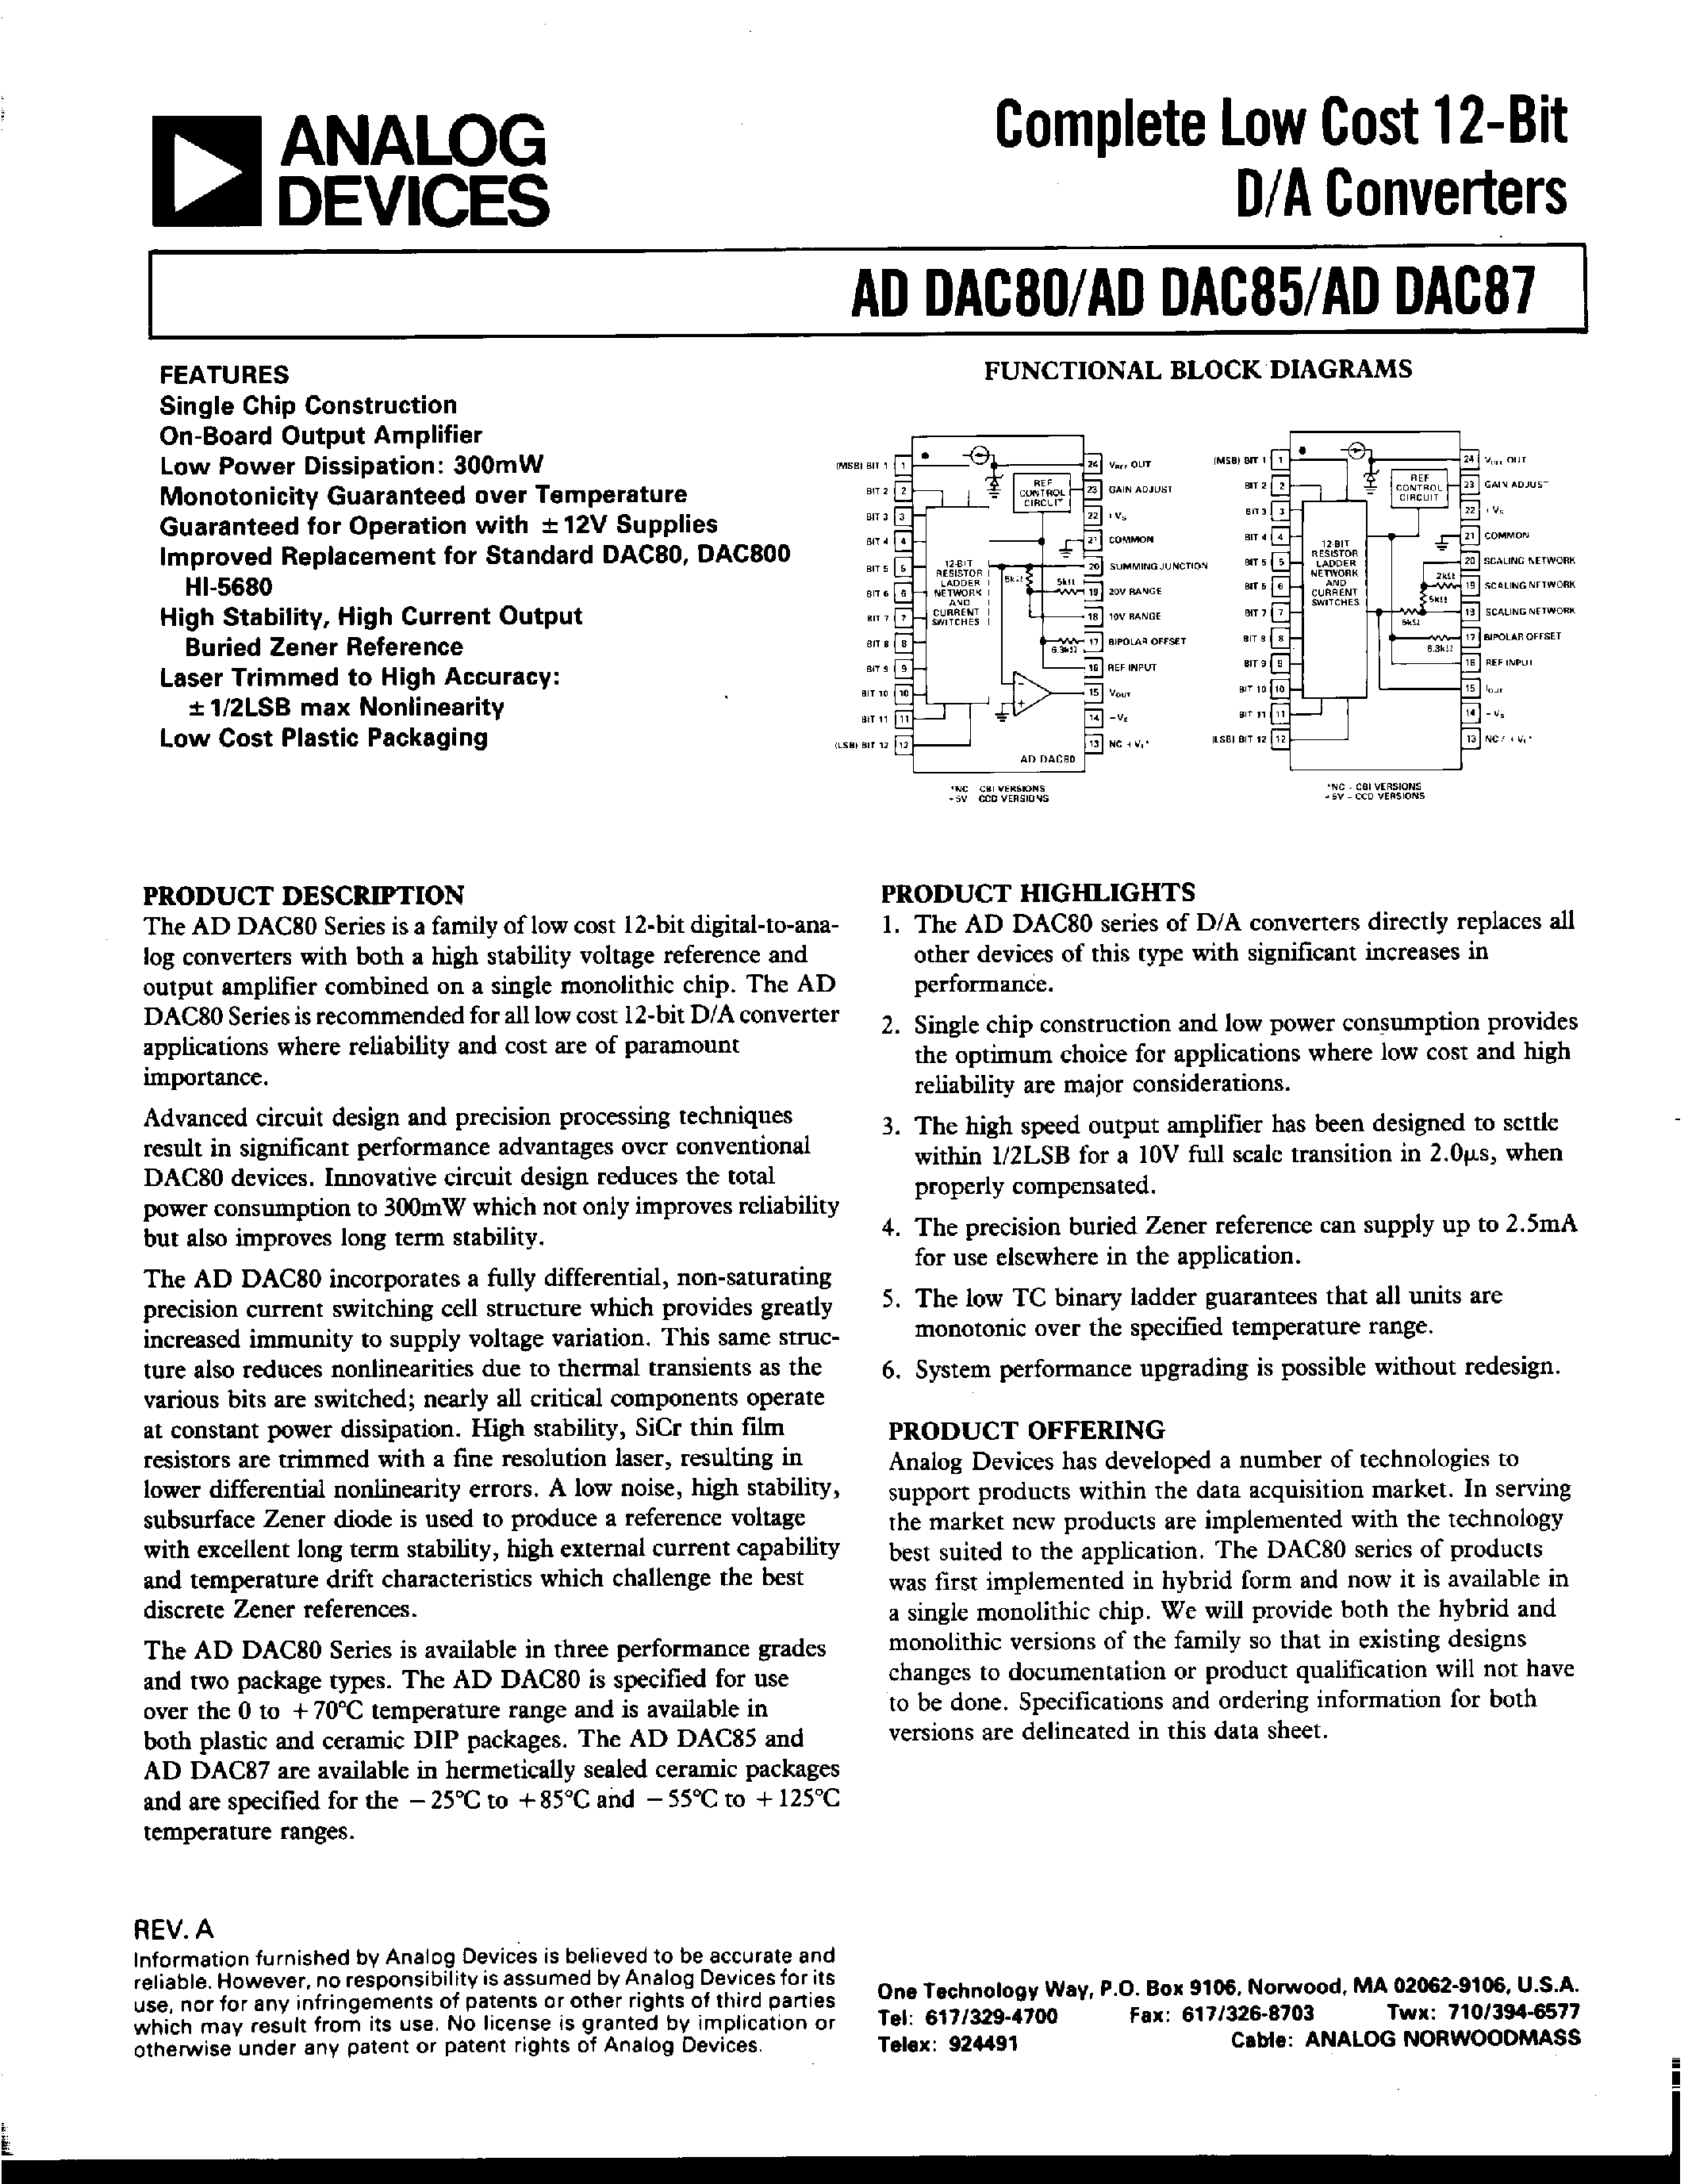 Datasheet ADDAC80Z-CCD-V - COMPLETE LOW COST 12-BIT D/A CONVERTERS page 1